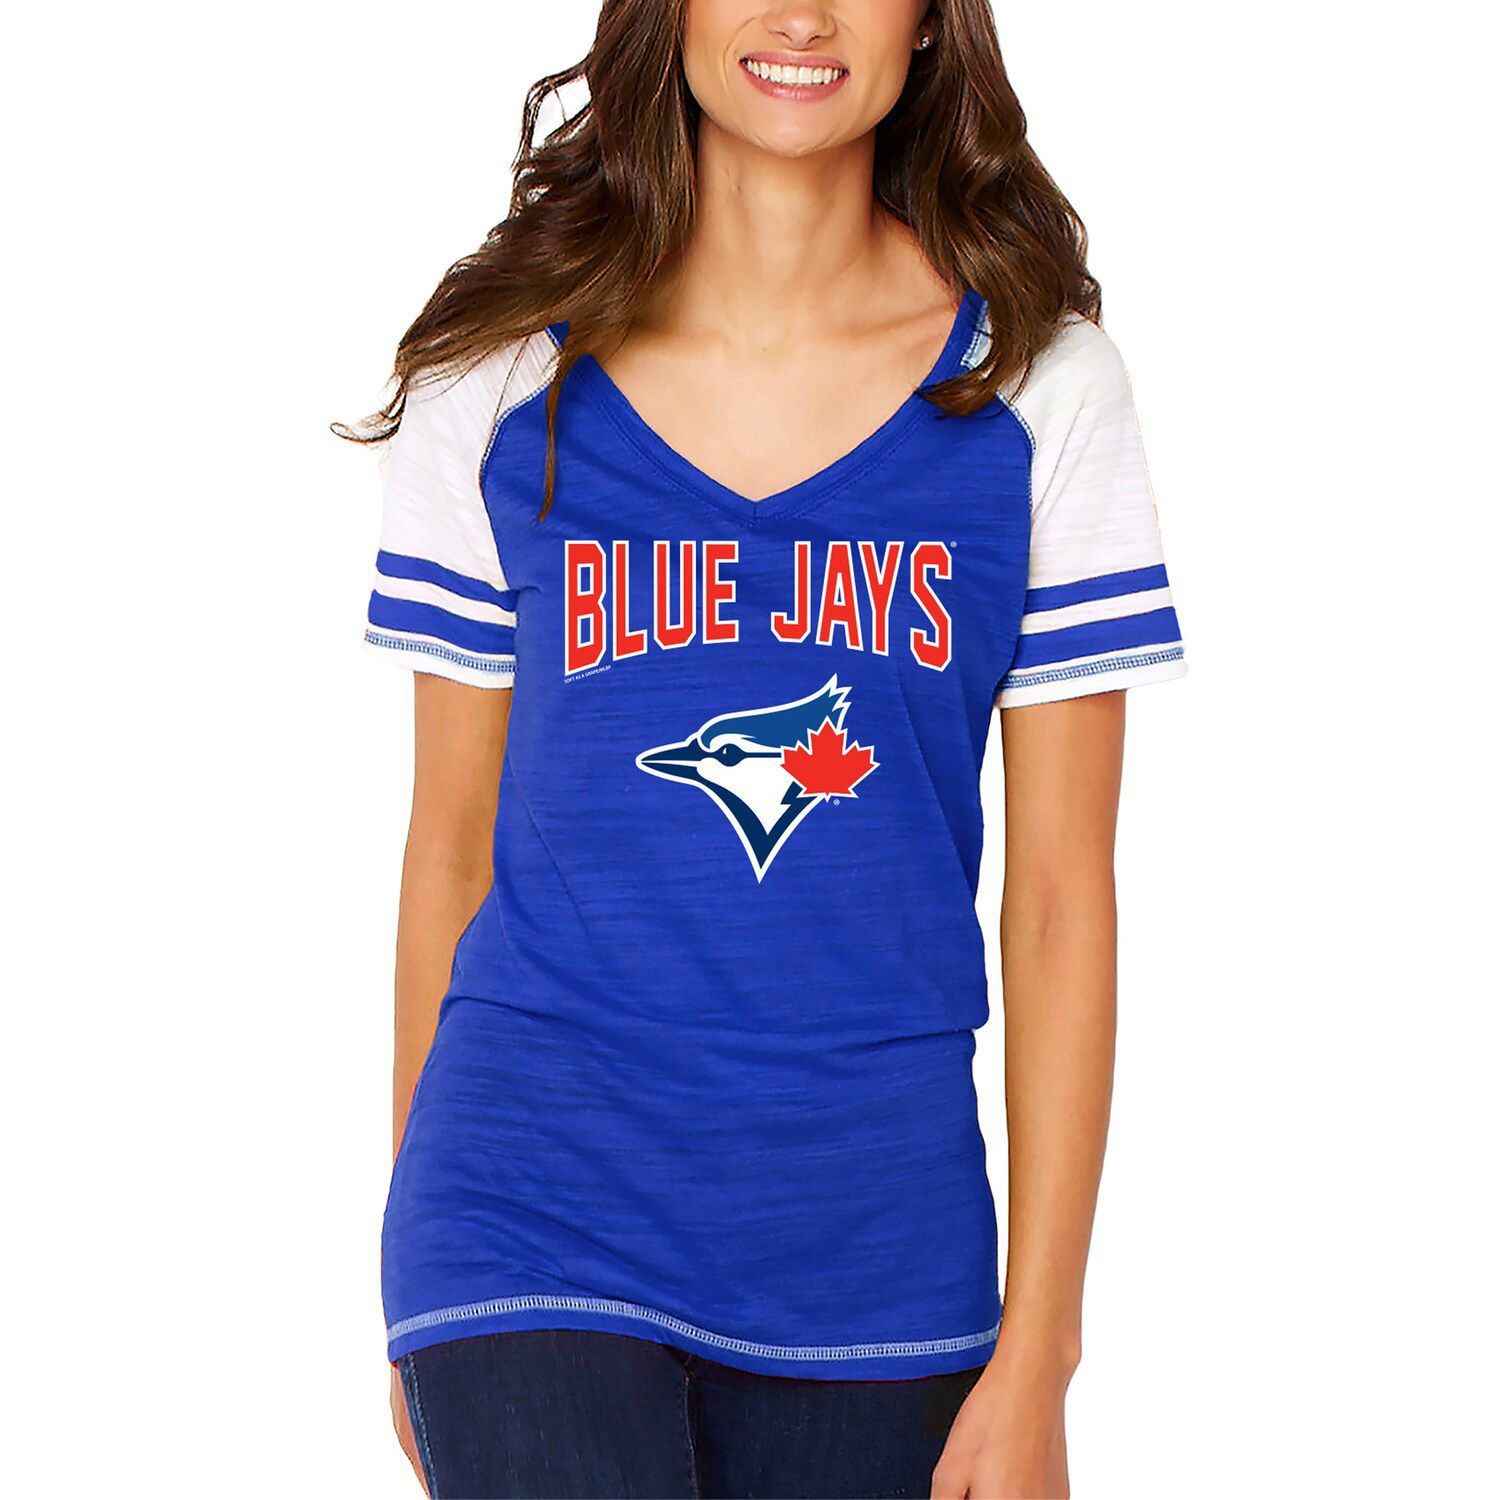 blue jays jersey outfit